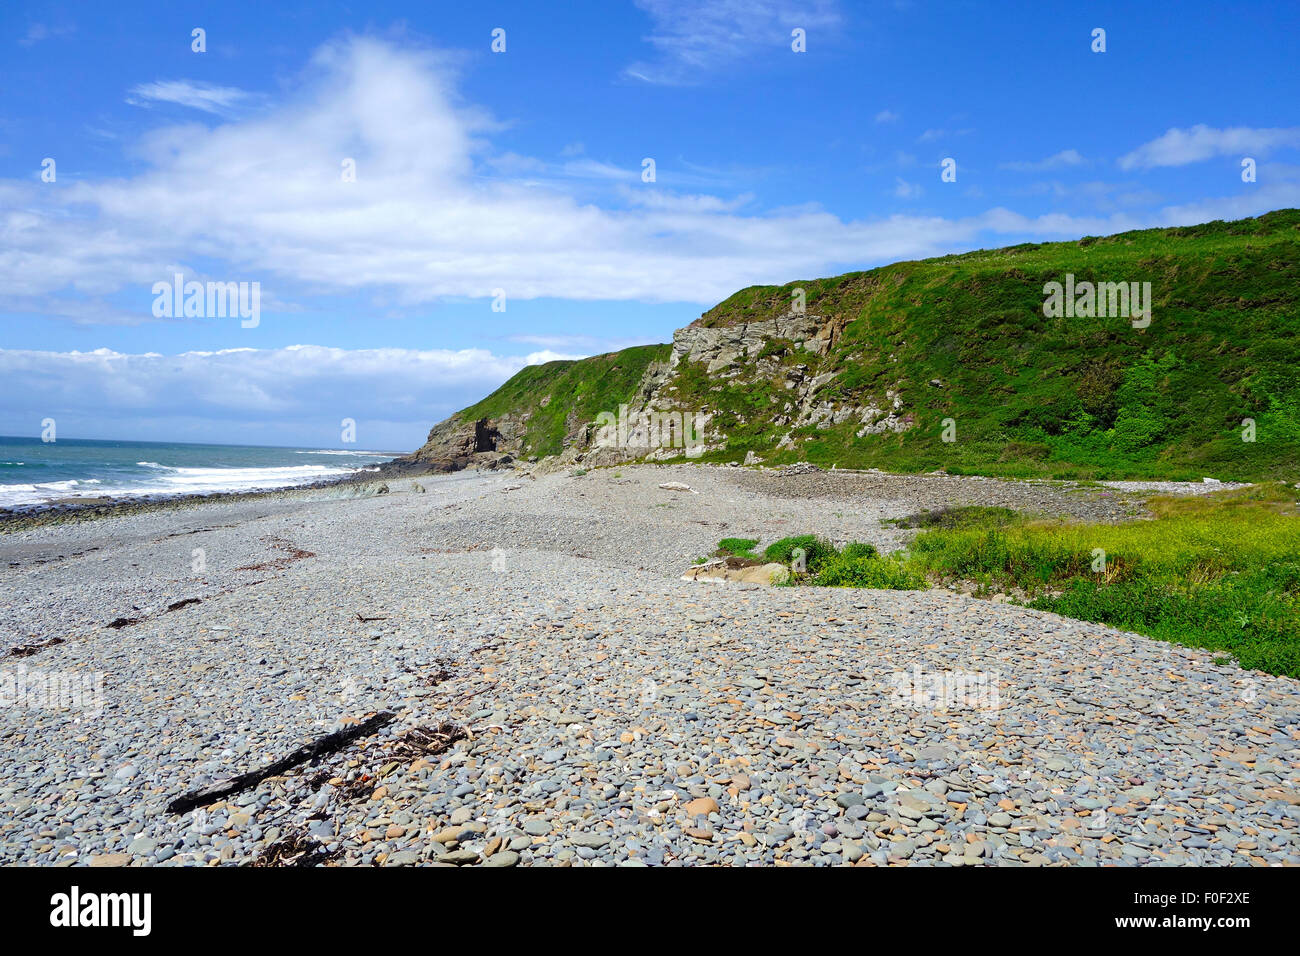 Port Castle Bay, Wigtownshire, The Machars, Dumfries & Galloway, Scotland, UK Stock Photo